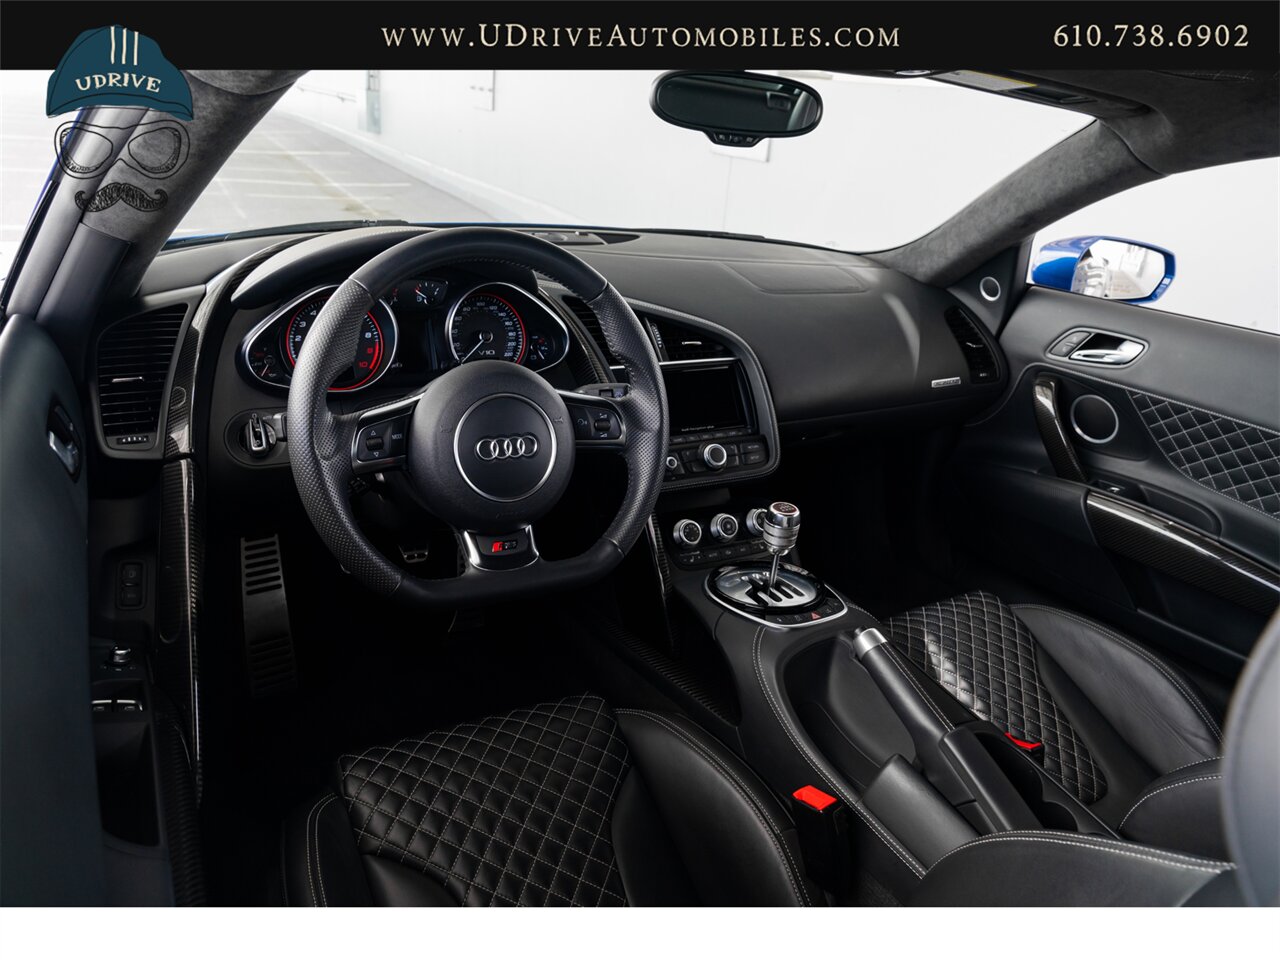 2015 Audi R8 5.2 V10 Quattro 6 Speed Manual 10k Miles  Diamond Stitched Leather 1 of 2 - Photo 31 - West Chester, PA 19382